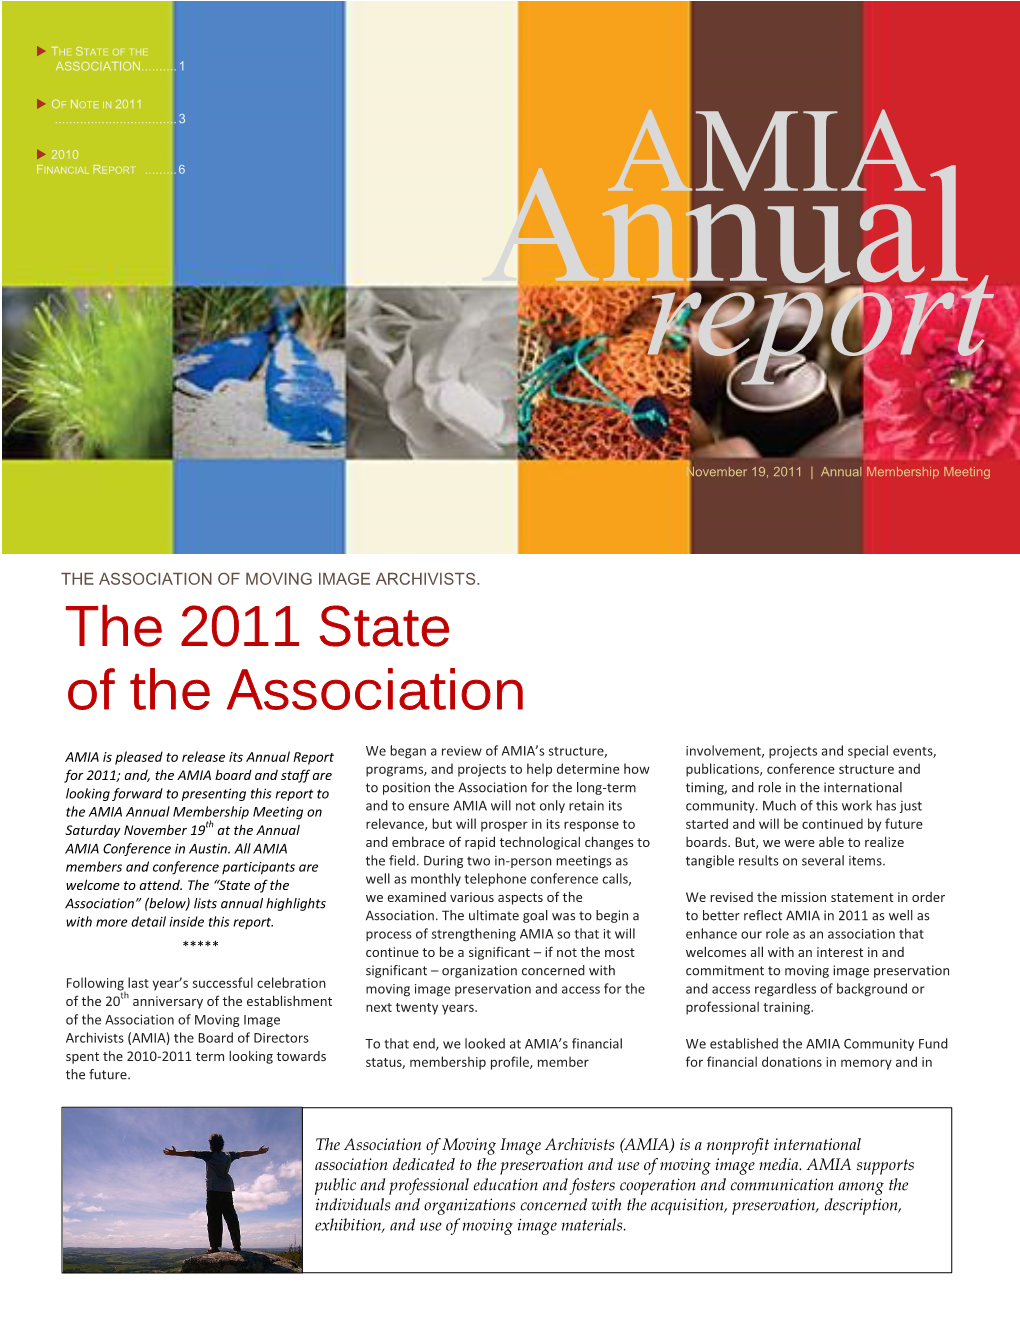 The 2011 State of the Association